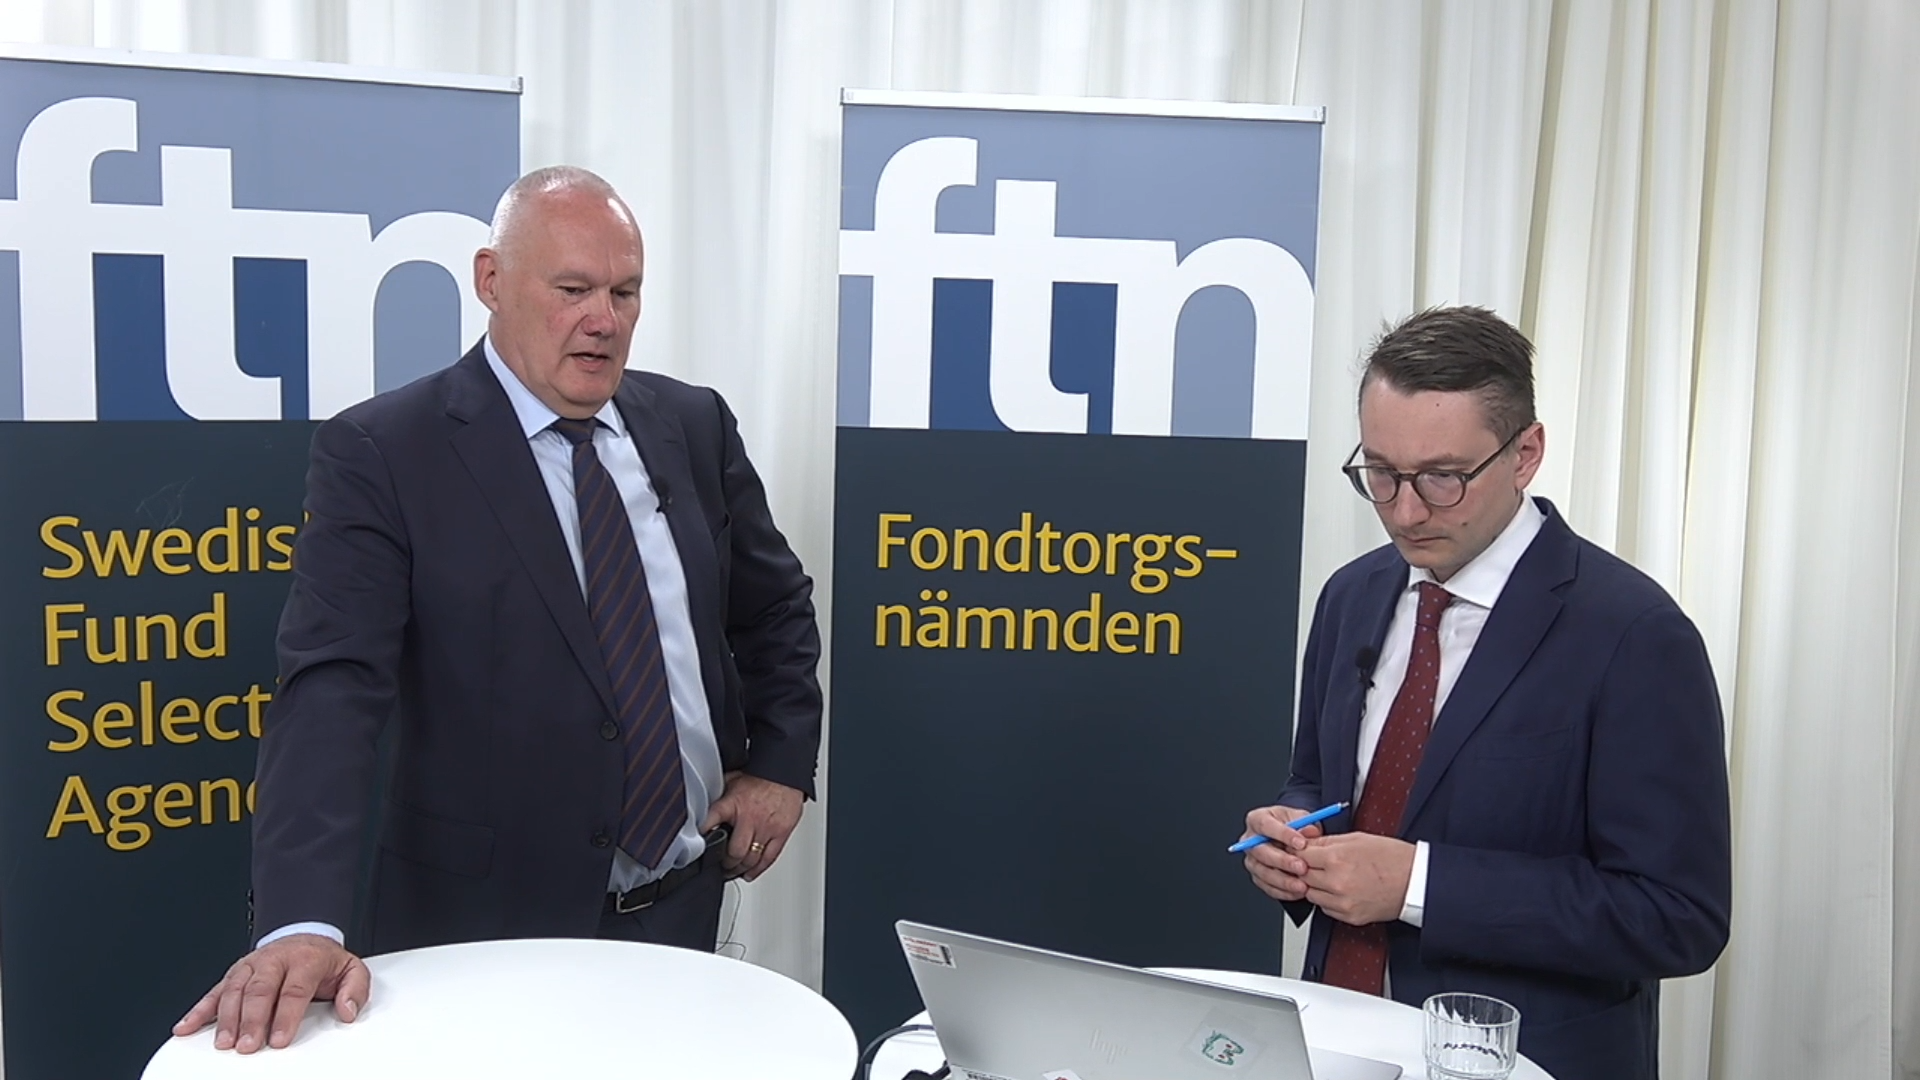 FTN's executive director, Erik Fransson (left) at the Q&A session with the agency's head of communications, Viktor Ström. | Photo: AMWatch